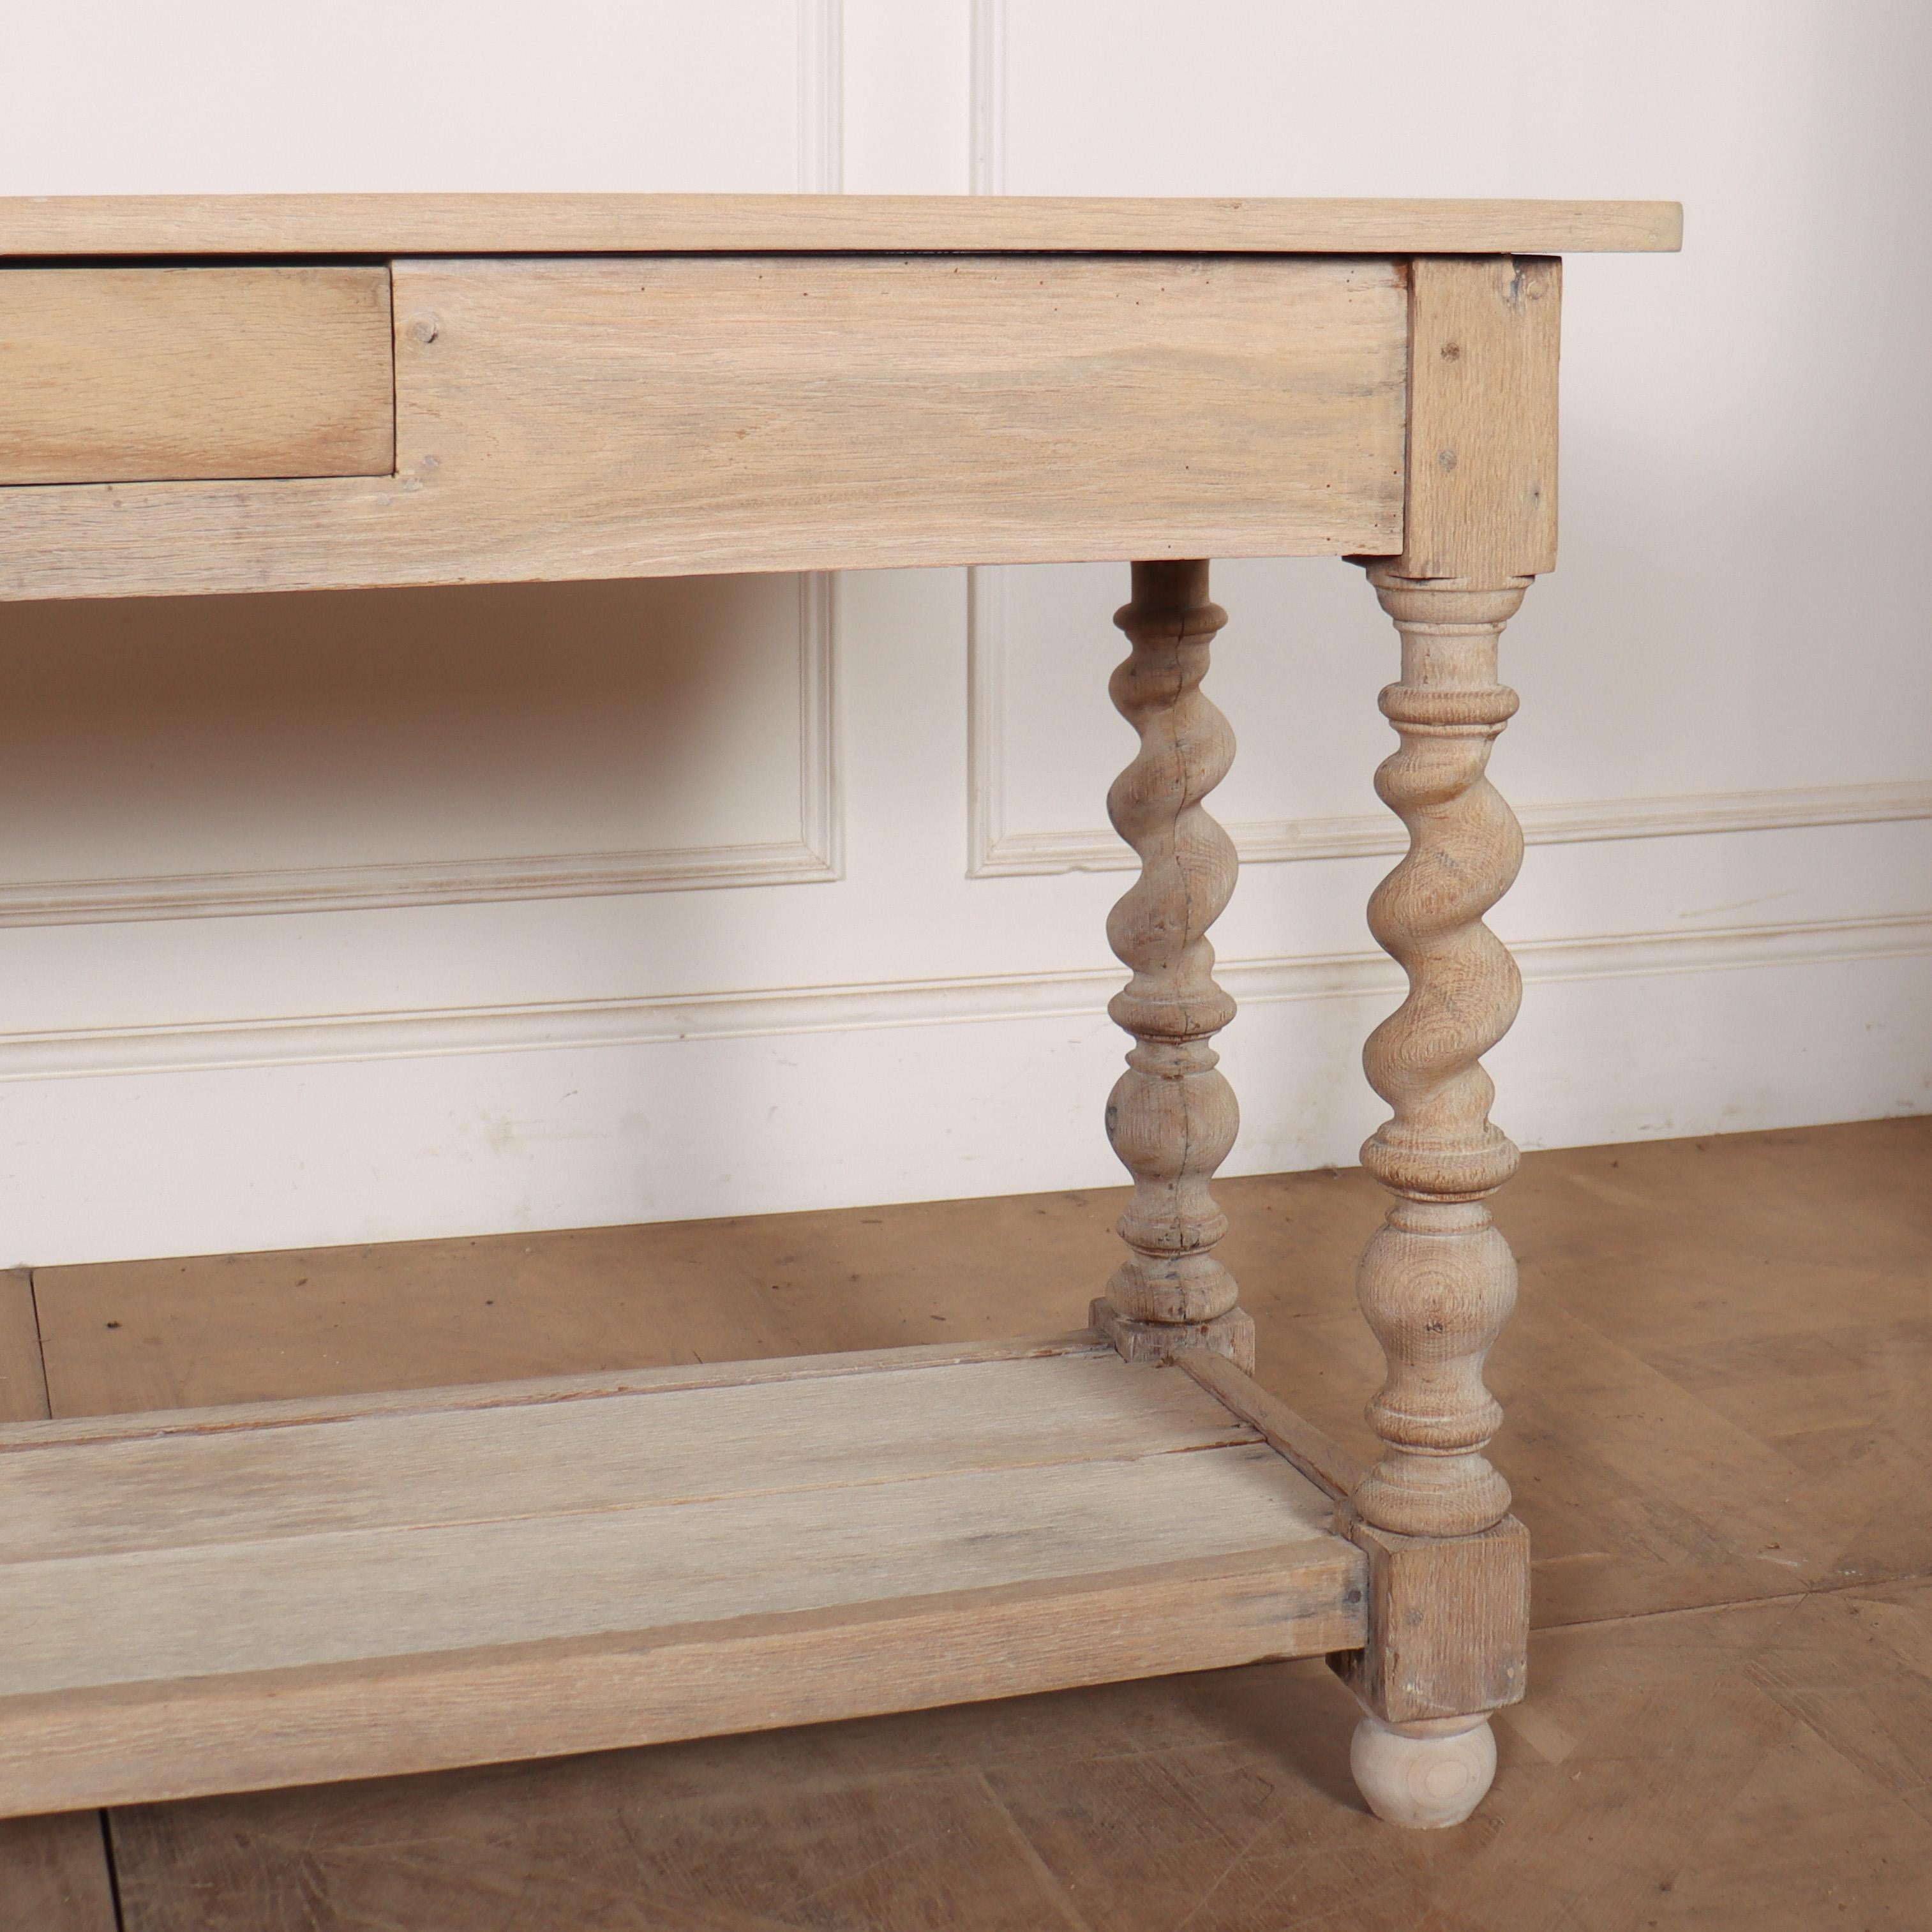 19th Century French Bleached Oak Console Table